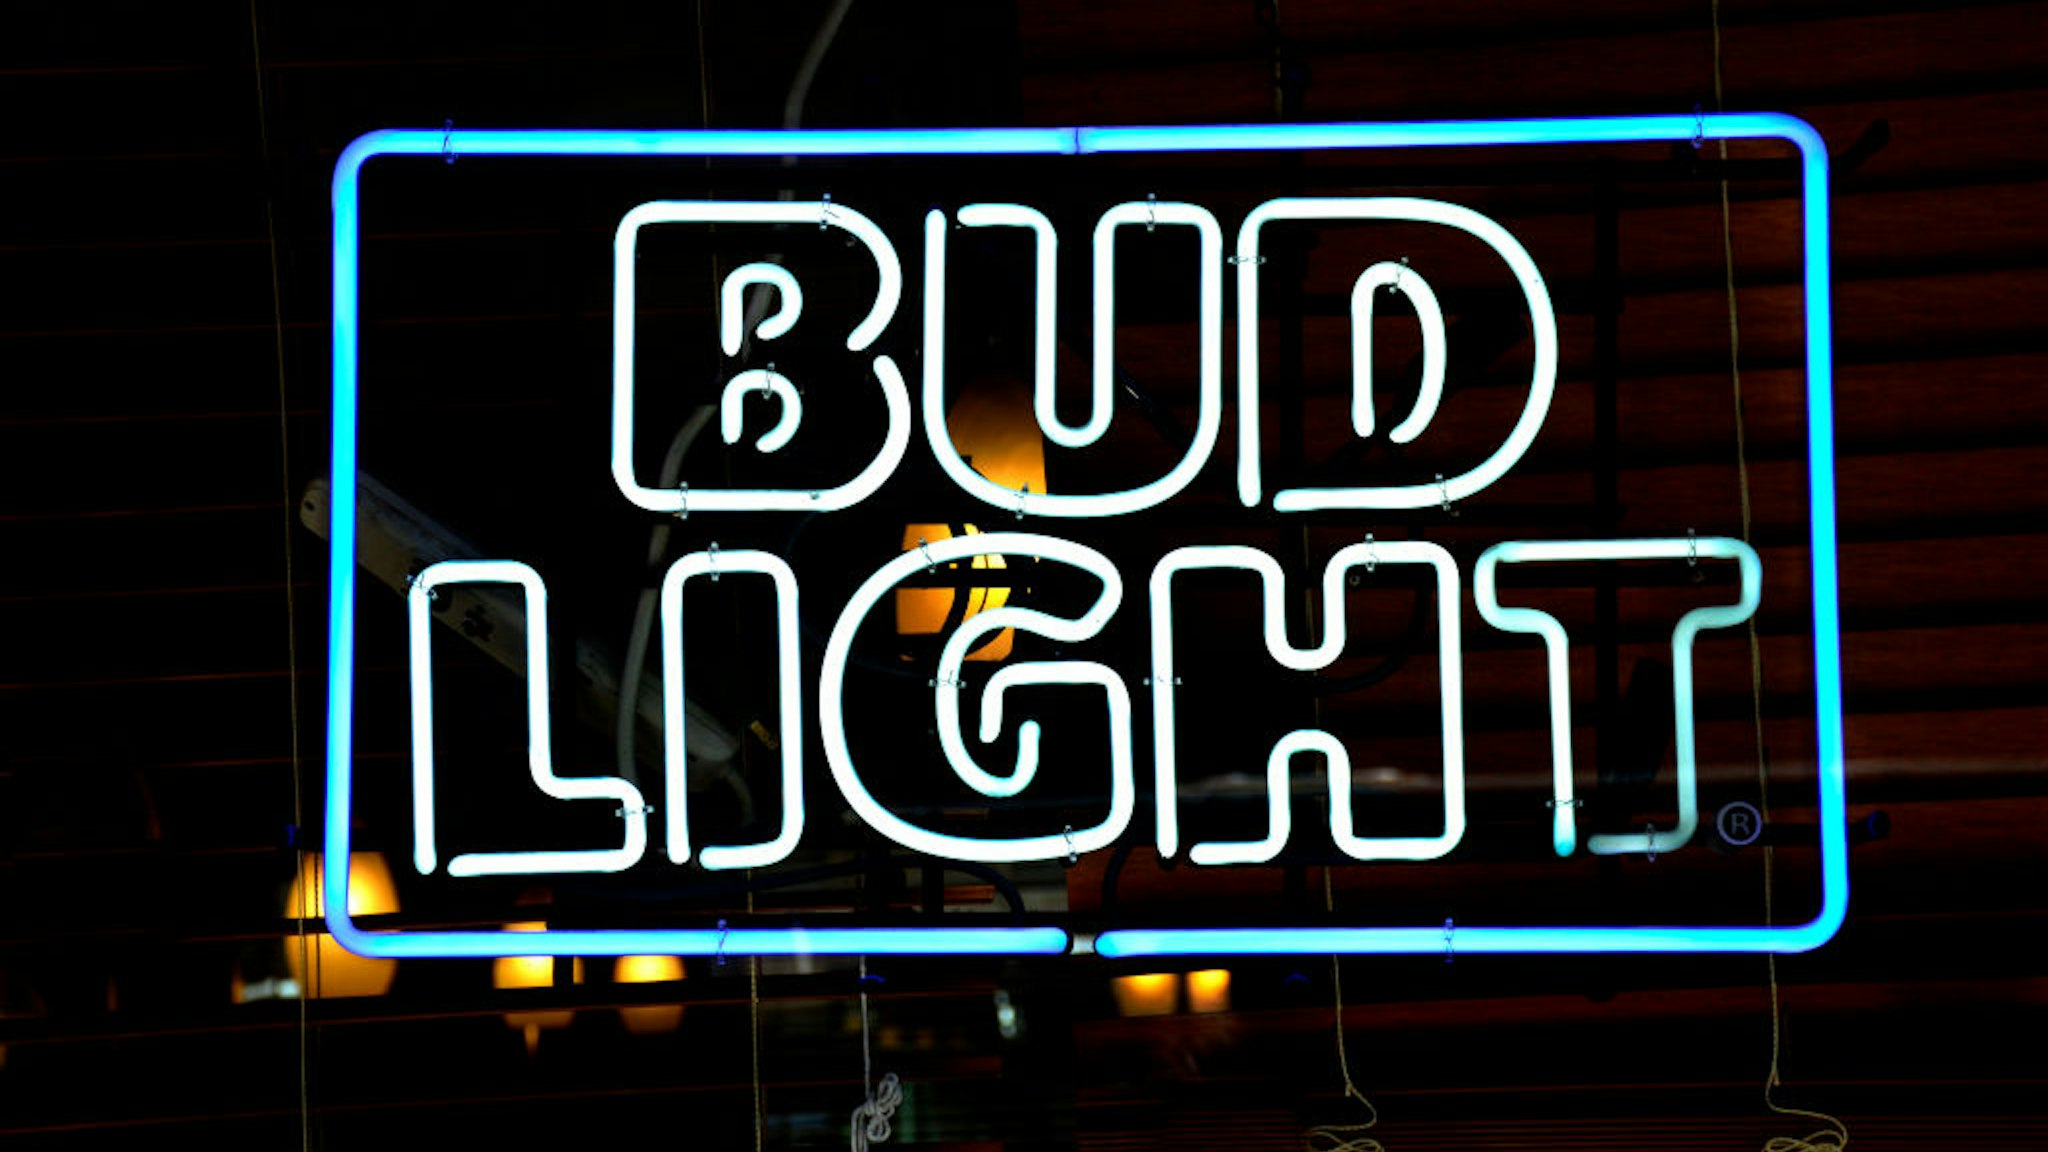 NEW YORK, NY - SEPTEMBER 23, 2017: A Bud Light neon sign hangs in the window of a store in New York, New York. (Photo by Robert Alexander/Getty Images)